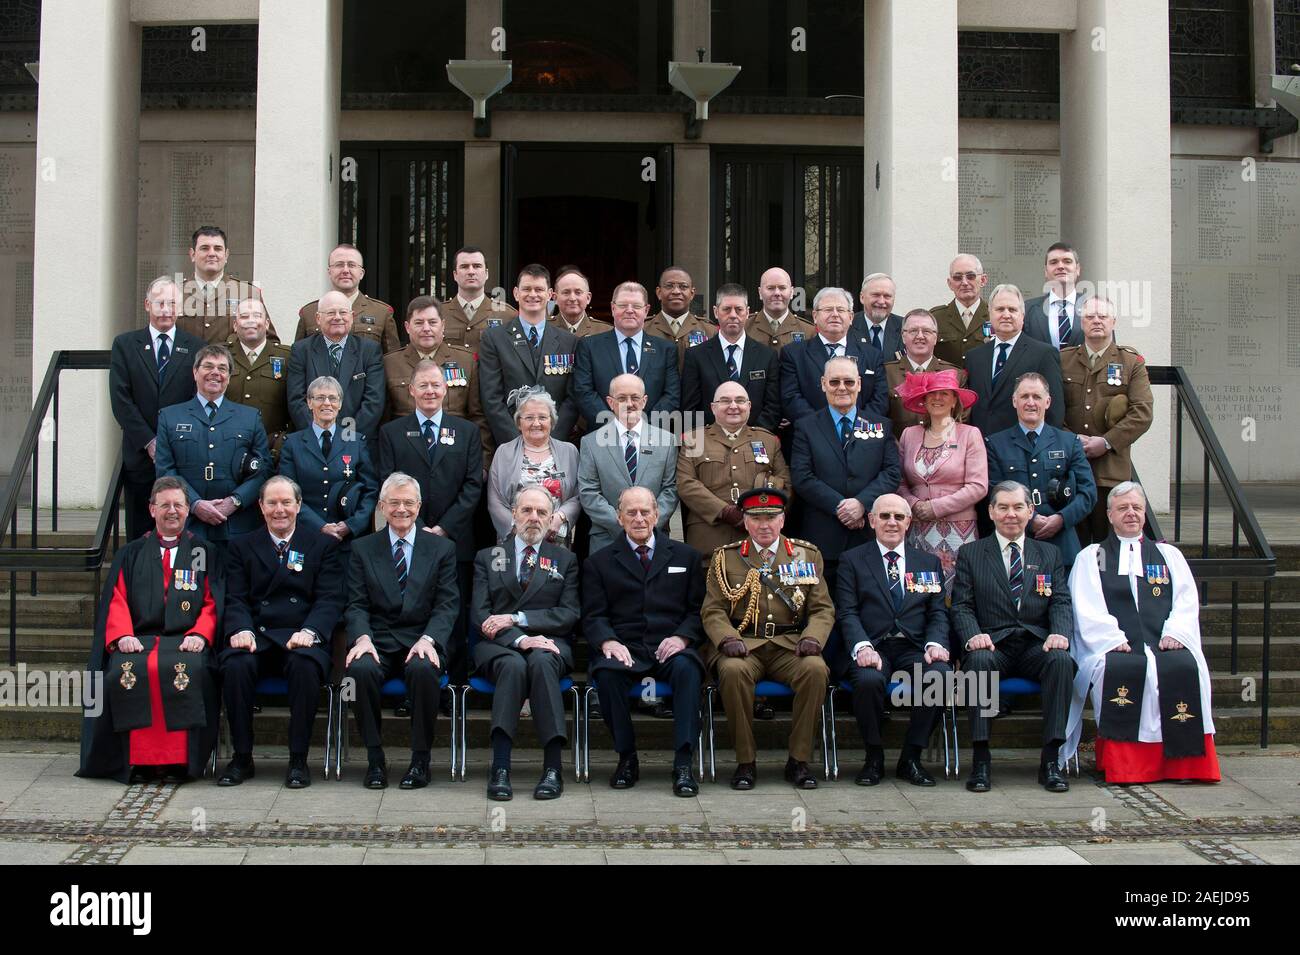 The Duke of Edinburgh attending a service for the 175th anniversary of the Soldier's and Airmen's scripture readers Association at the Guards Chapel in London. L-R (front row only) The Reverand Jonathan Woodhouse, Colonel Edward Armistead, Air Commodore Ben Laite, Vice President Sir Lawrence New, Duke of Edinburgh, General Lord Dannatt, Major General Morgan Llewellyn, Chairman Brigadier Ian Dobbie and The Venerable Ray Pentland RAF. Stock Photo